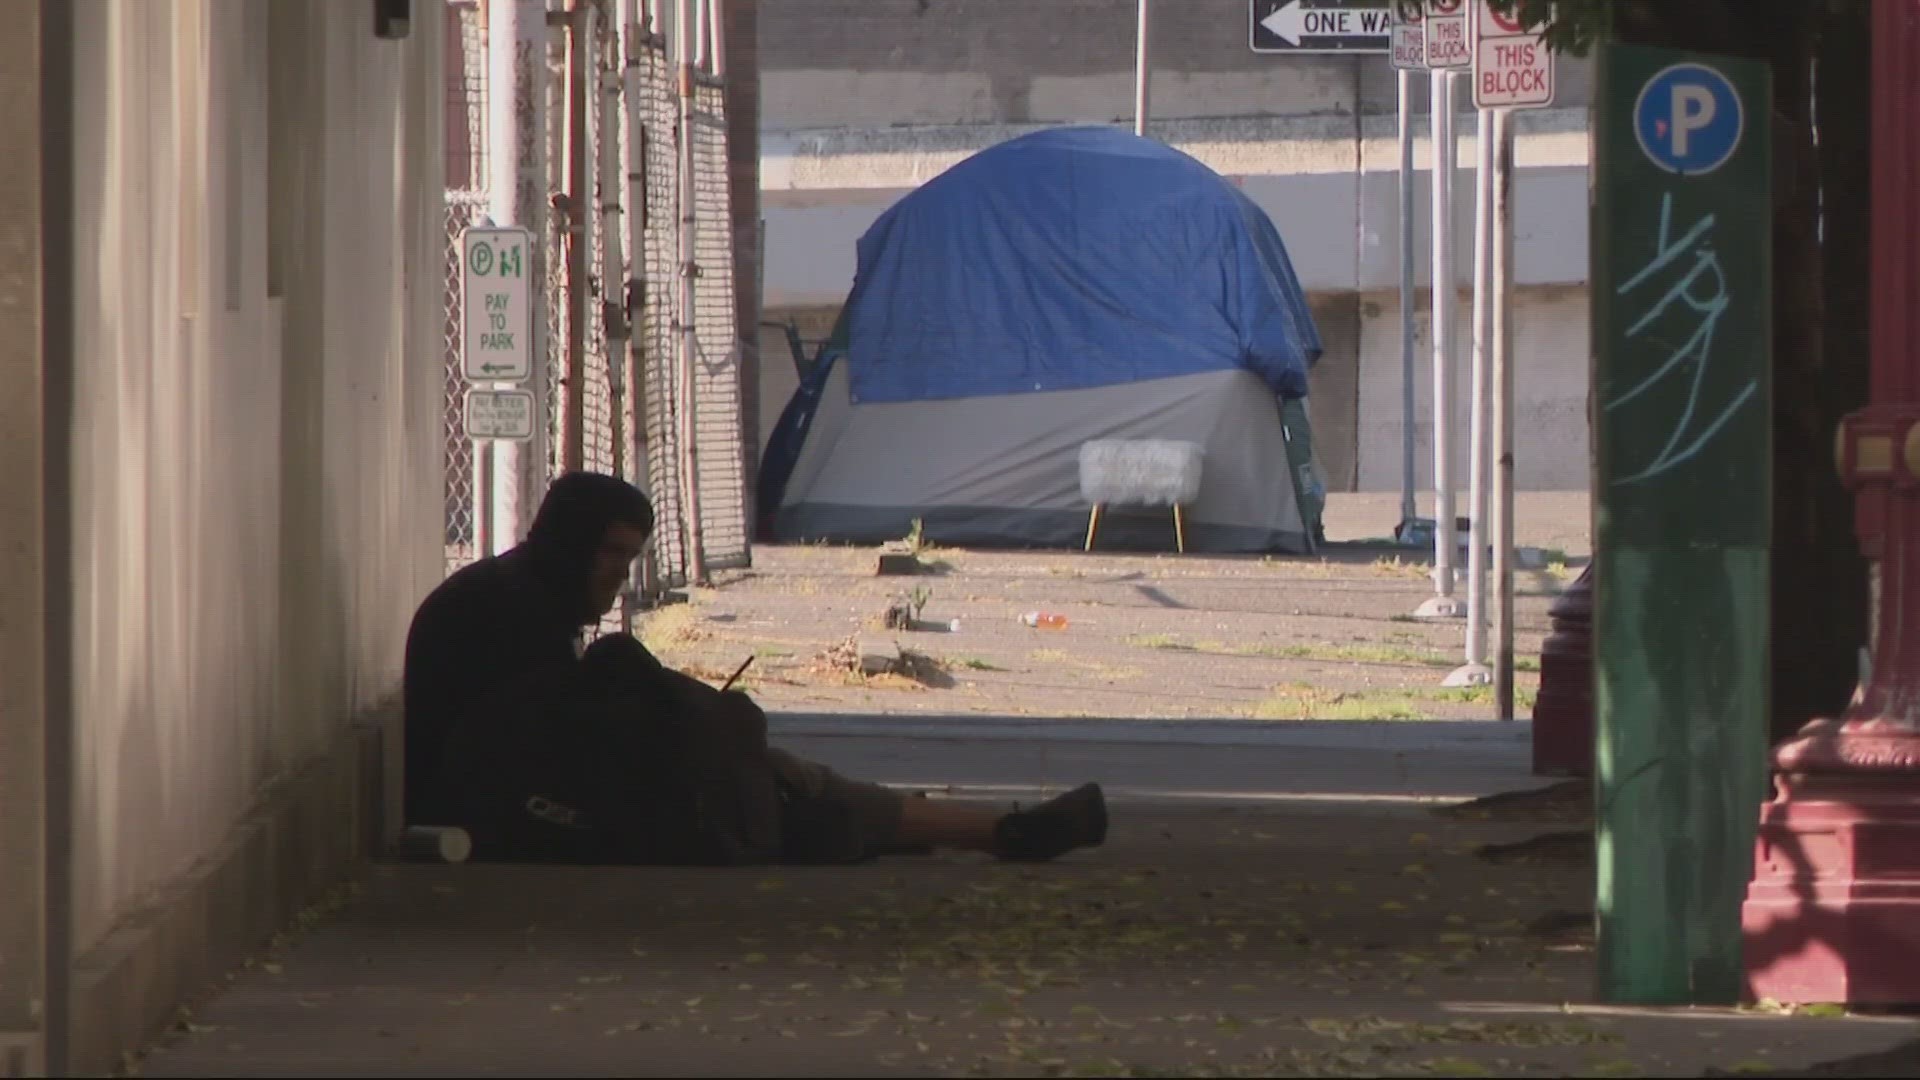 The lawsuit accused the city of violating the rights of people with mobility challenges by failing to keep public sidewalks clear of tent encampments.